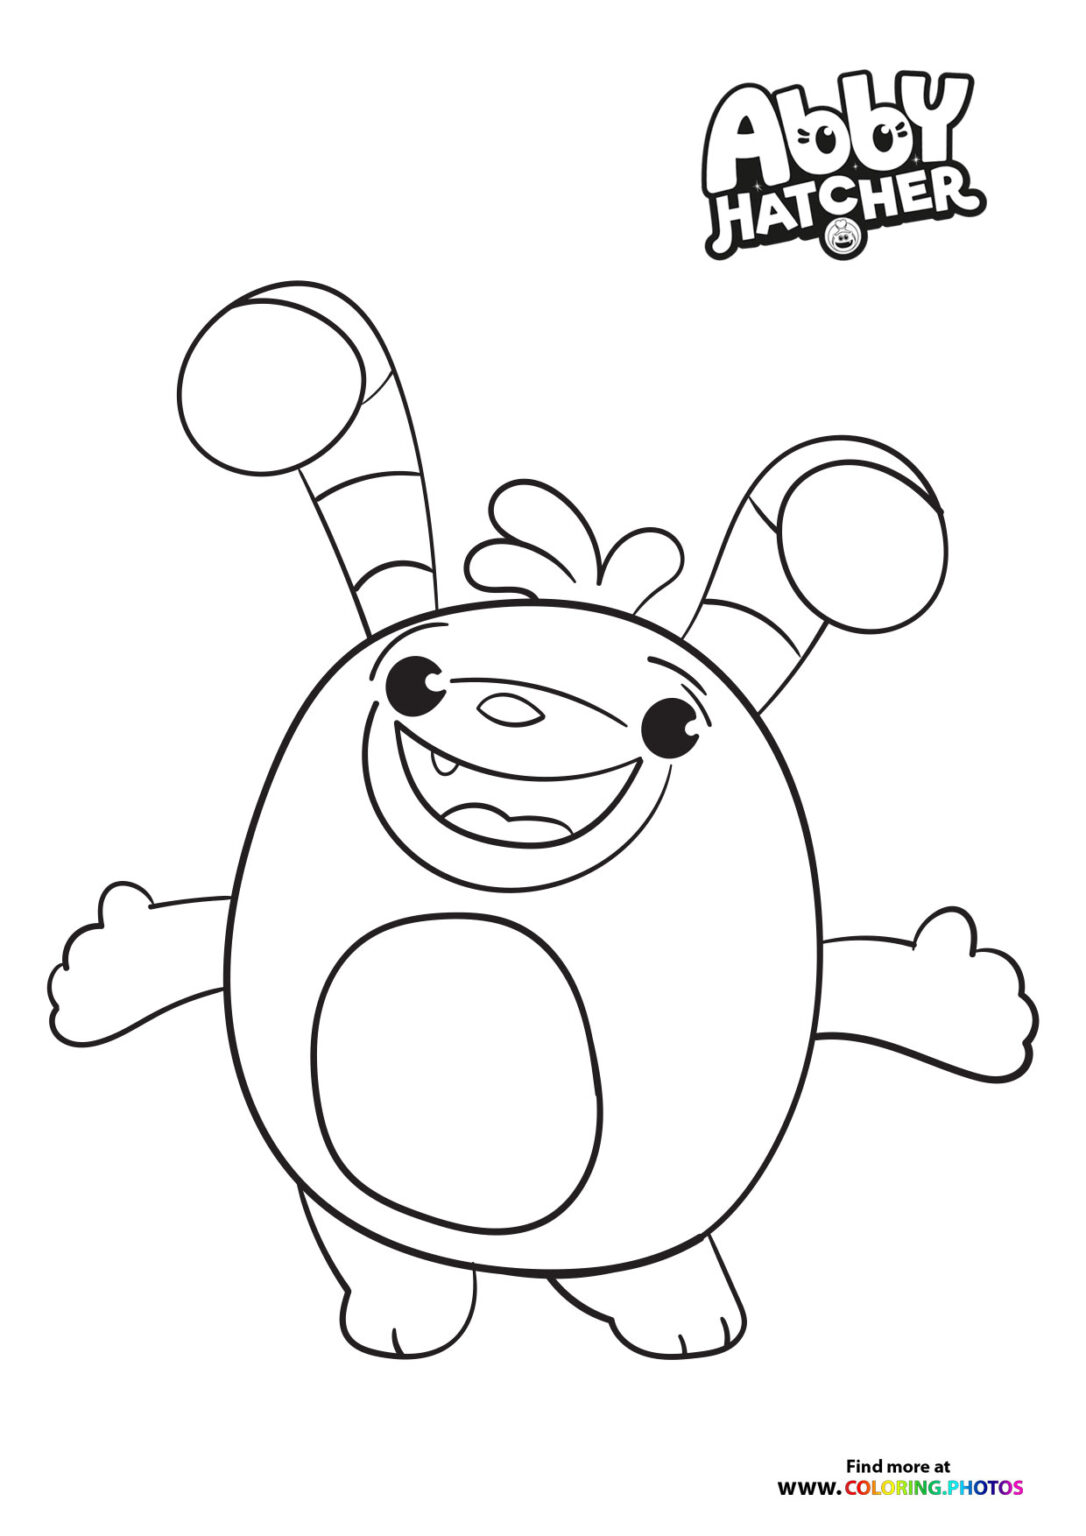 Harriet from Abby Hatcher - Coloring Pages for kids